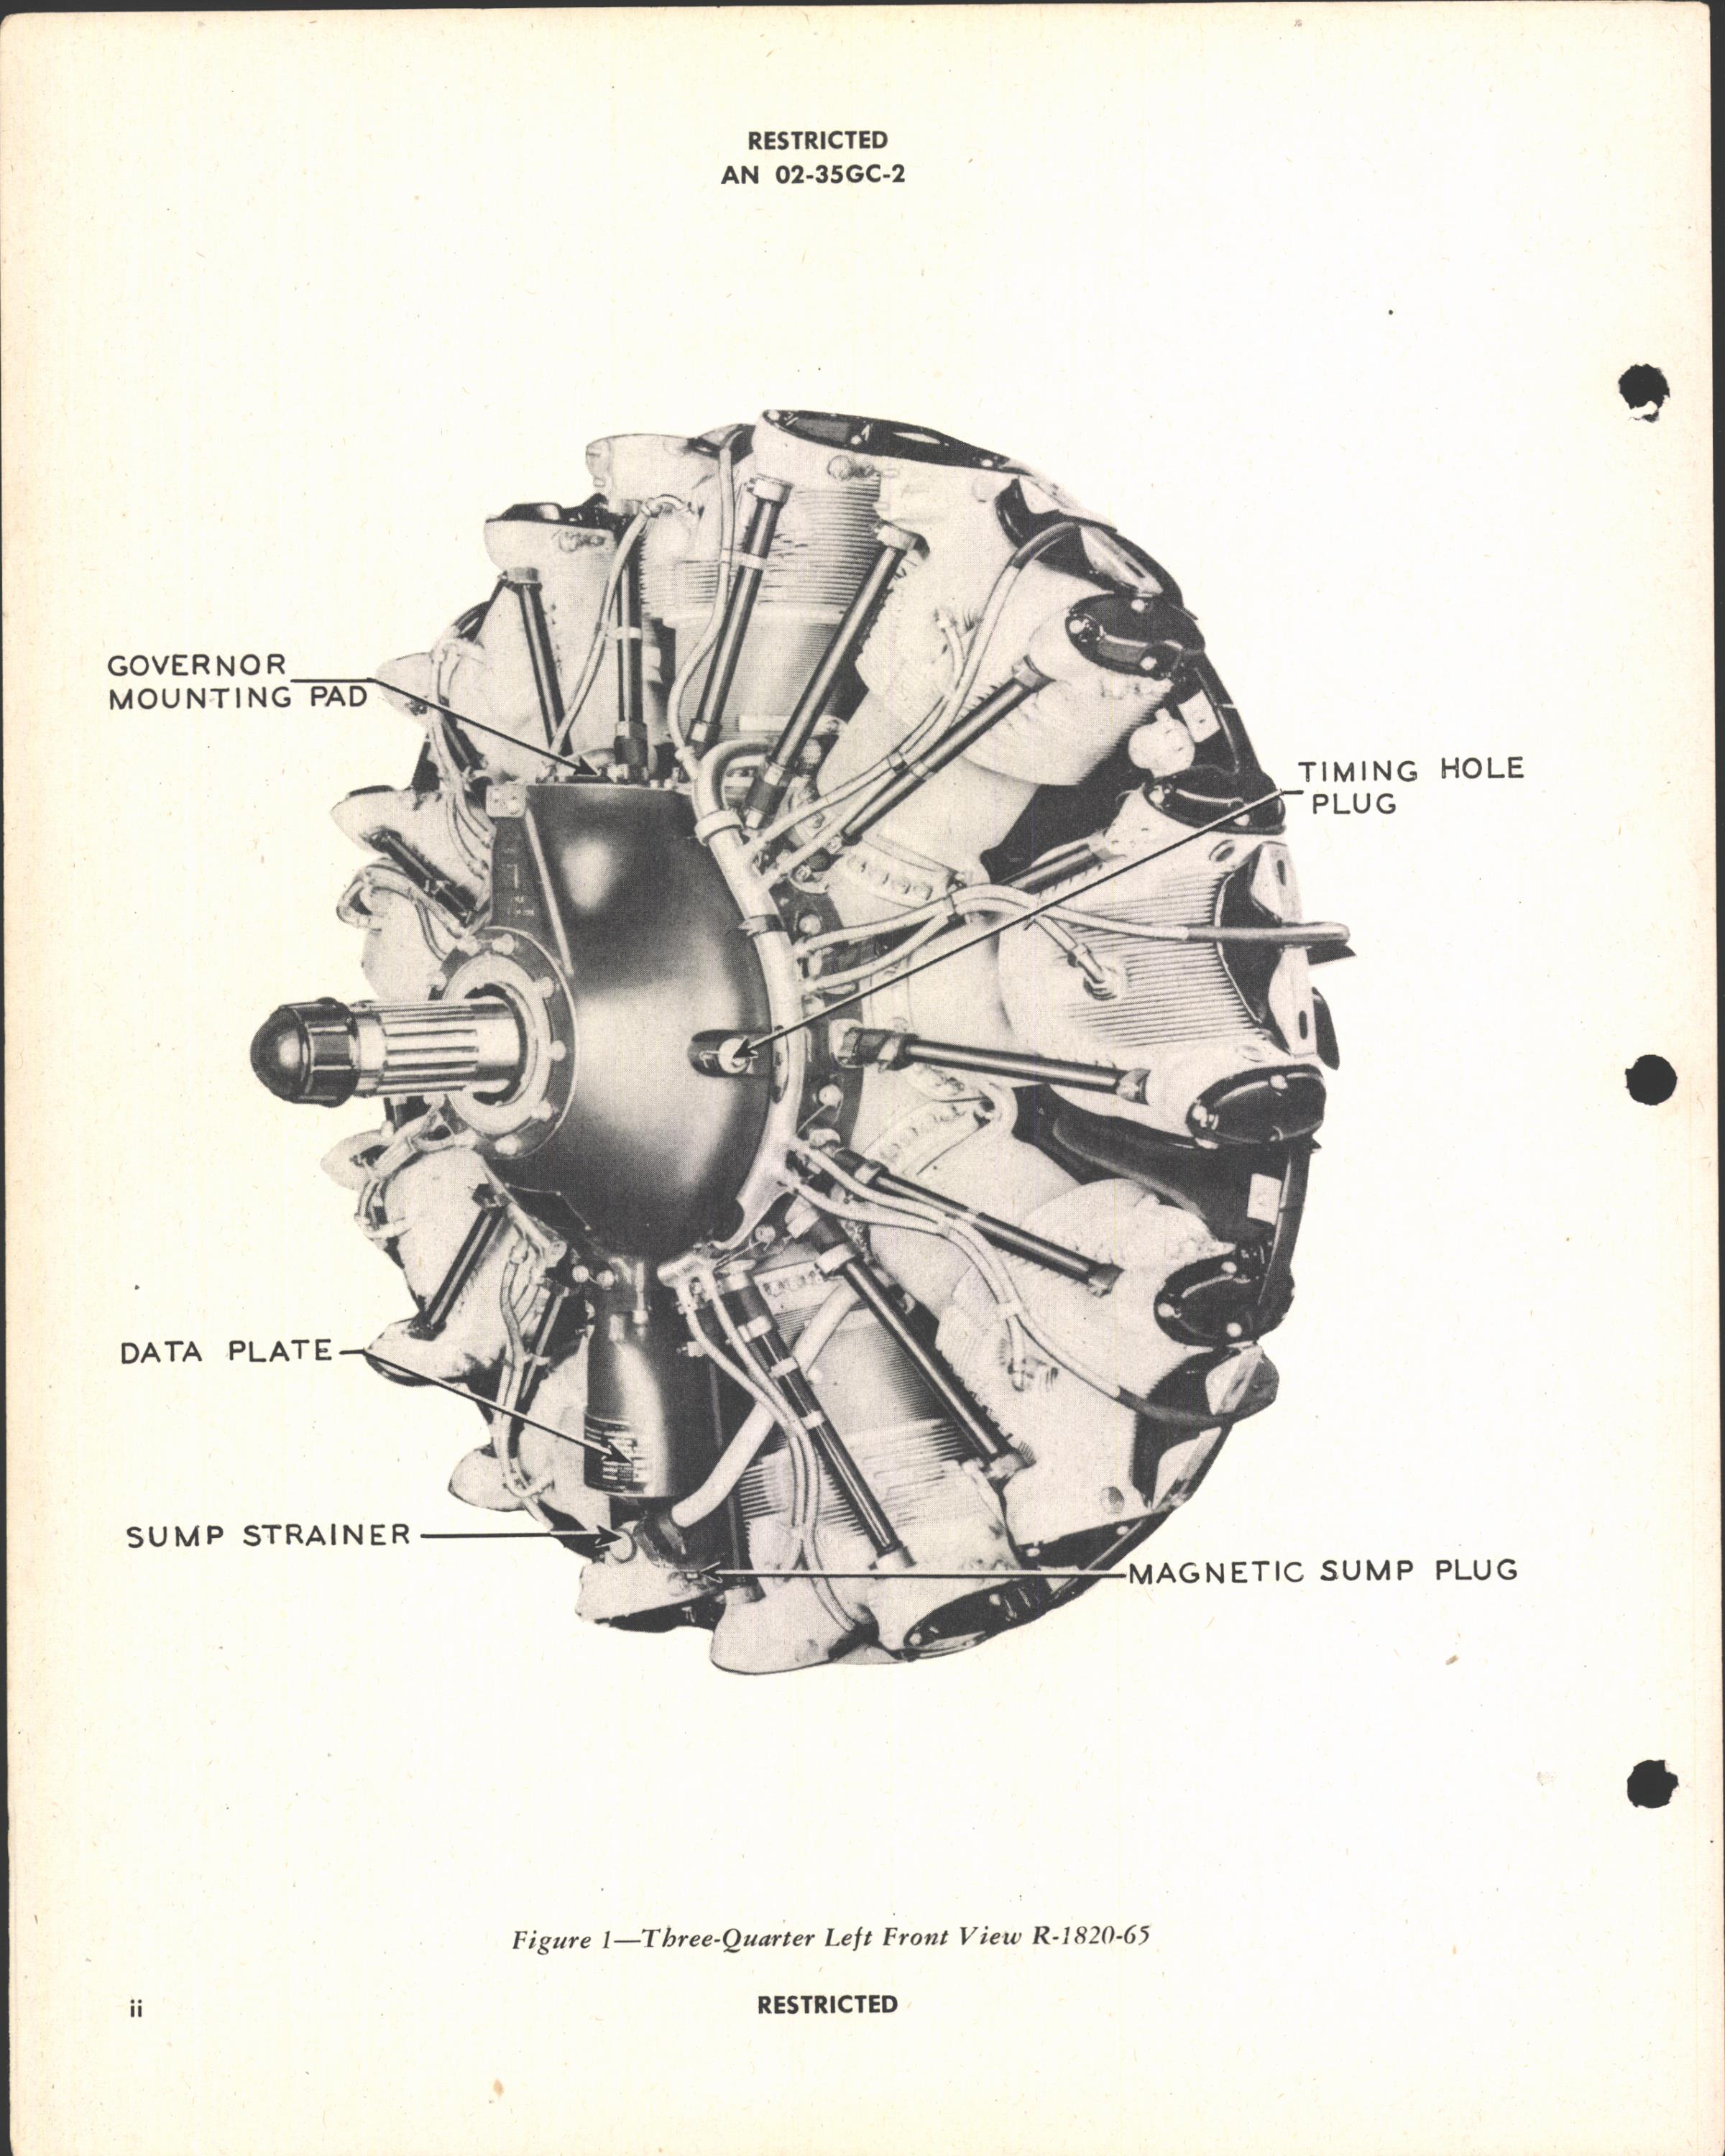 Sample page 6 from AirCorps Library document: Service Instructions for R-1820 Wright Aircraft Engines